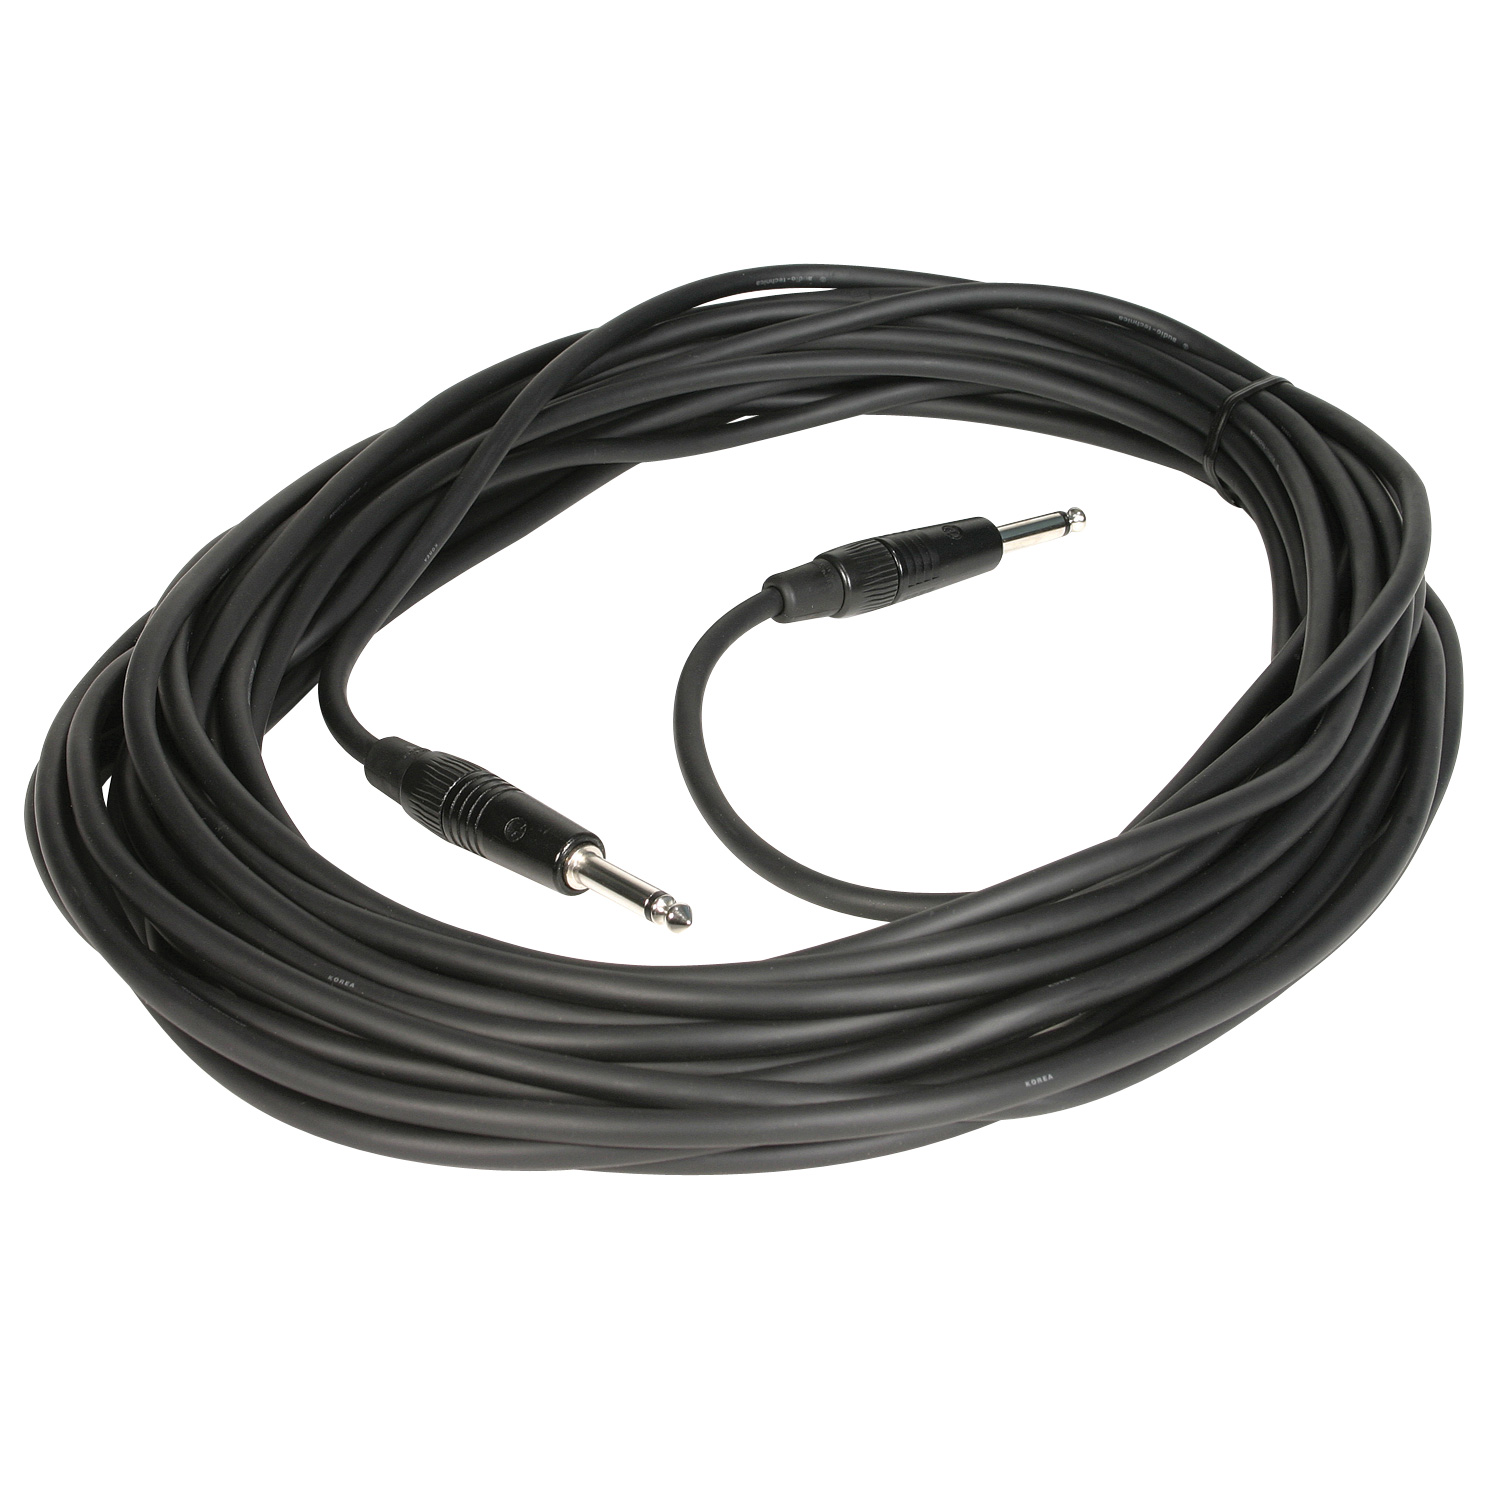 50 Speaker Cable for Voice Machine 1